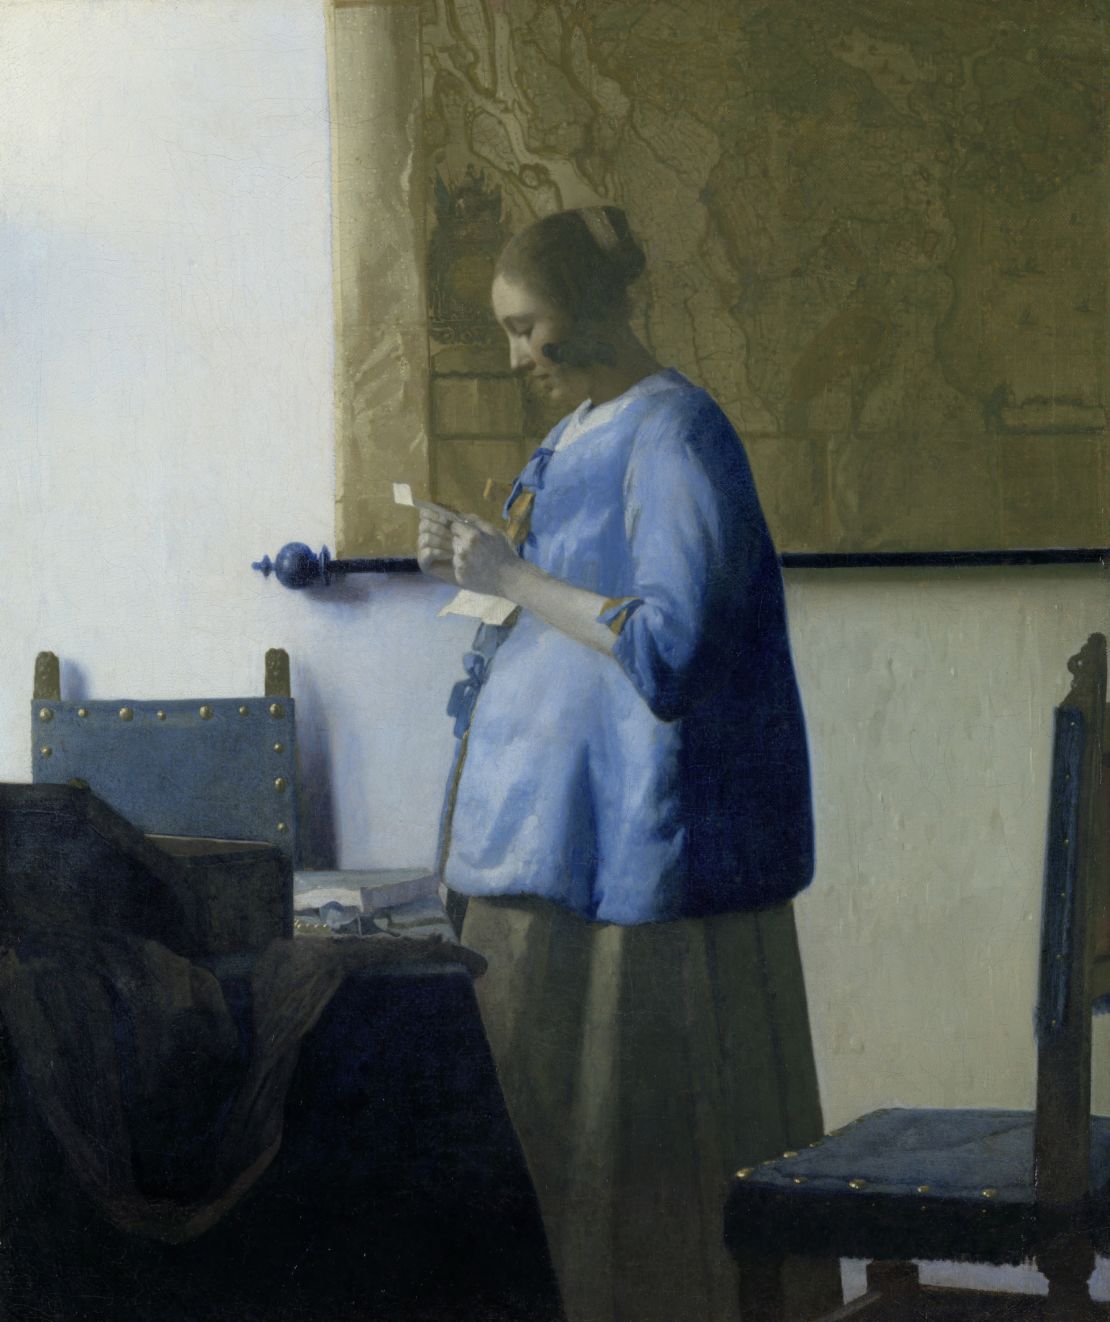 "Woman in Blue Reading a Letter" illustrates many of the same themes: a solitary figure reading a letter in a familiar domestic space, lit by the light of a window to the left.